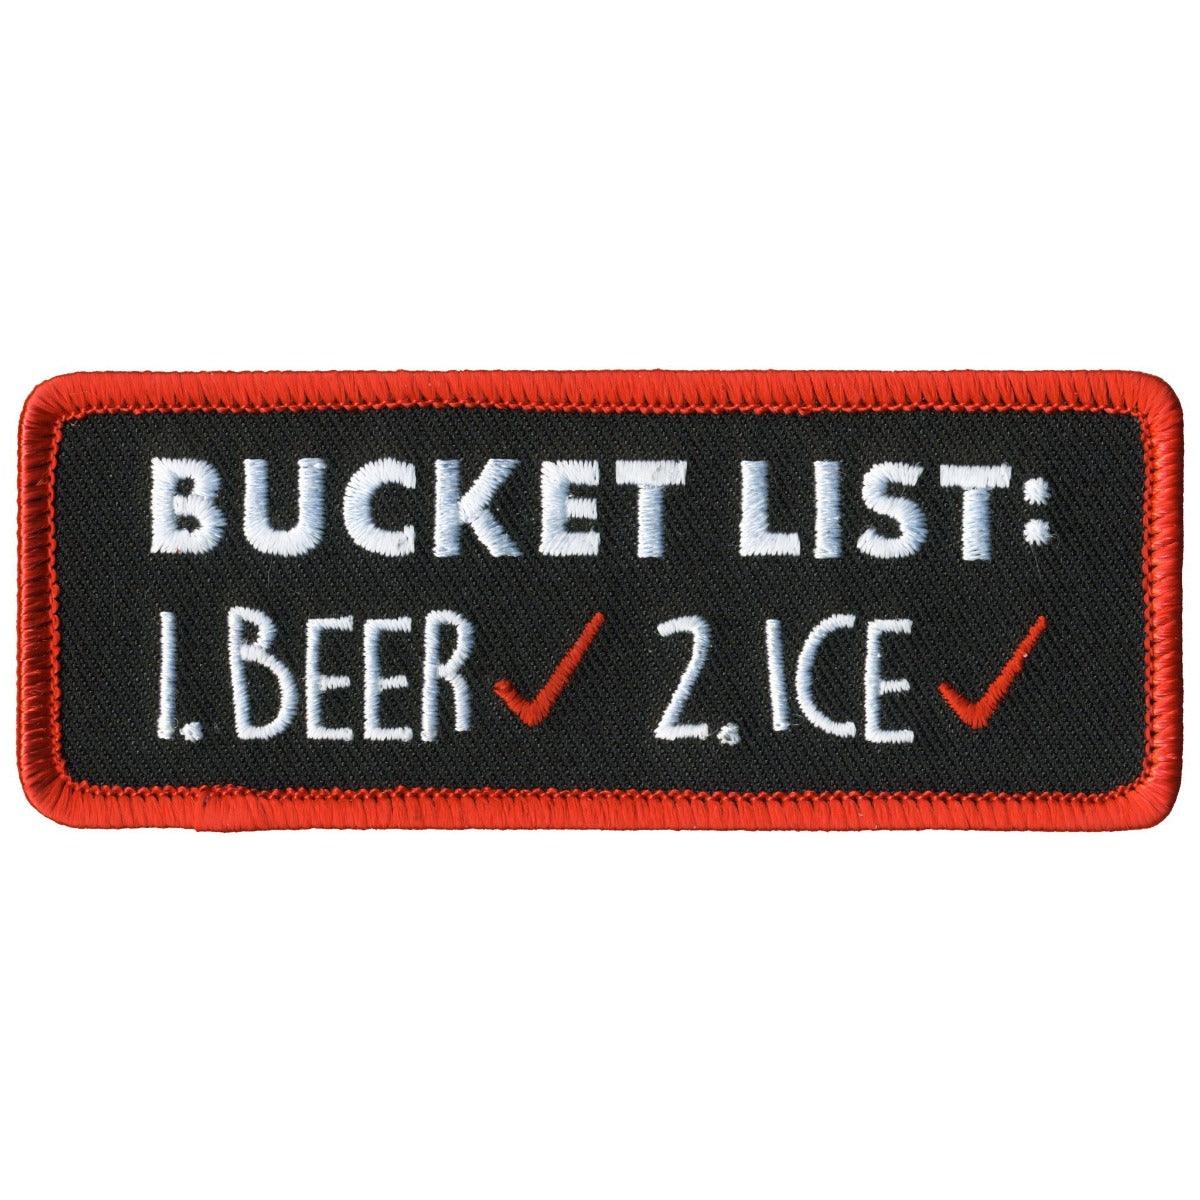 Hot Leather Bucket List Patch - American Legend Rider